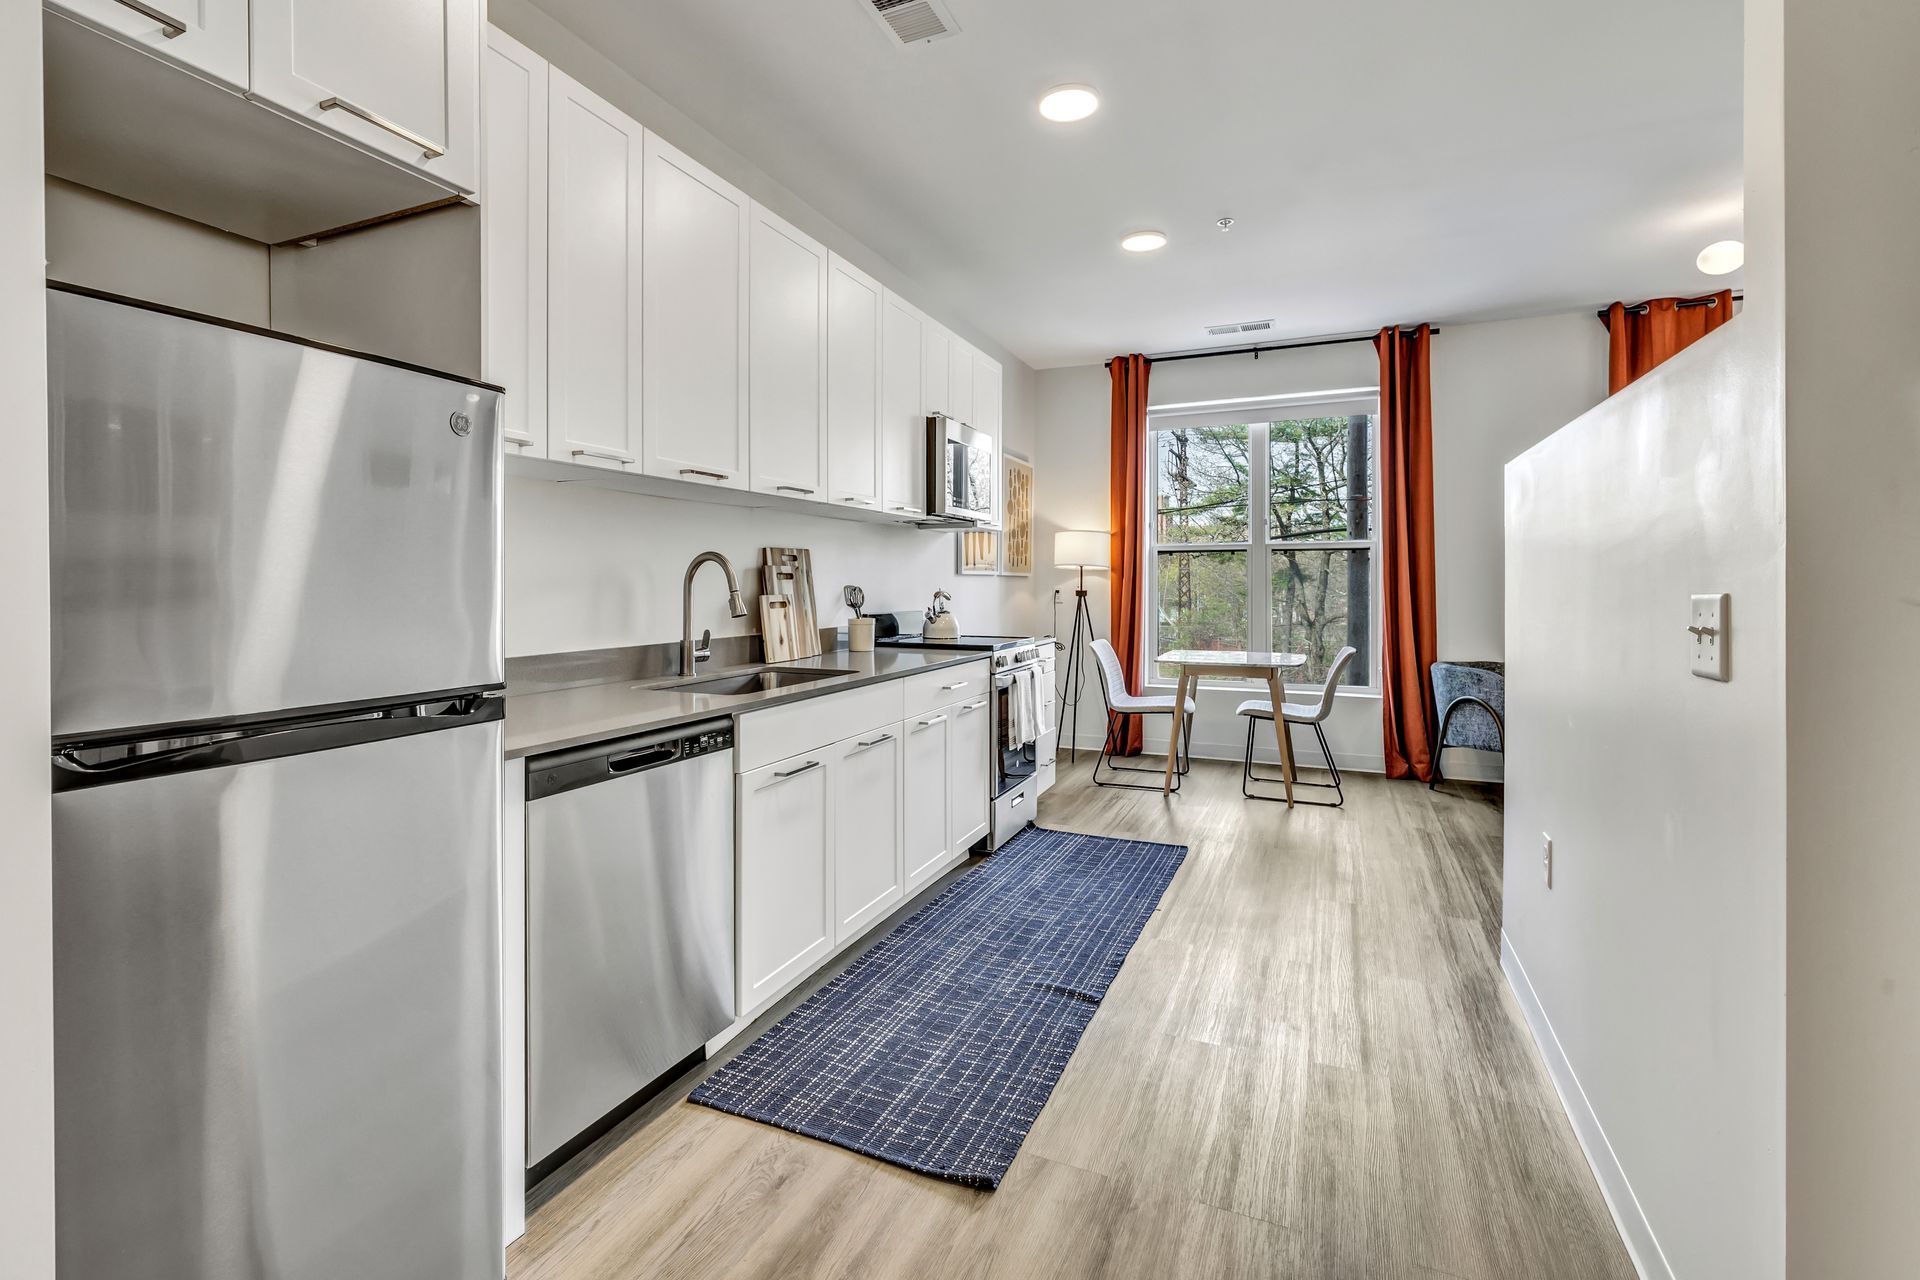 Kitchen with stainless steel appliances  at Olive and Wooster.